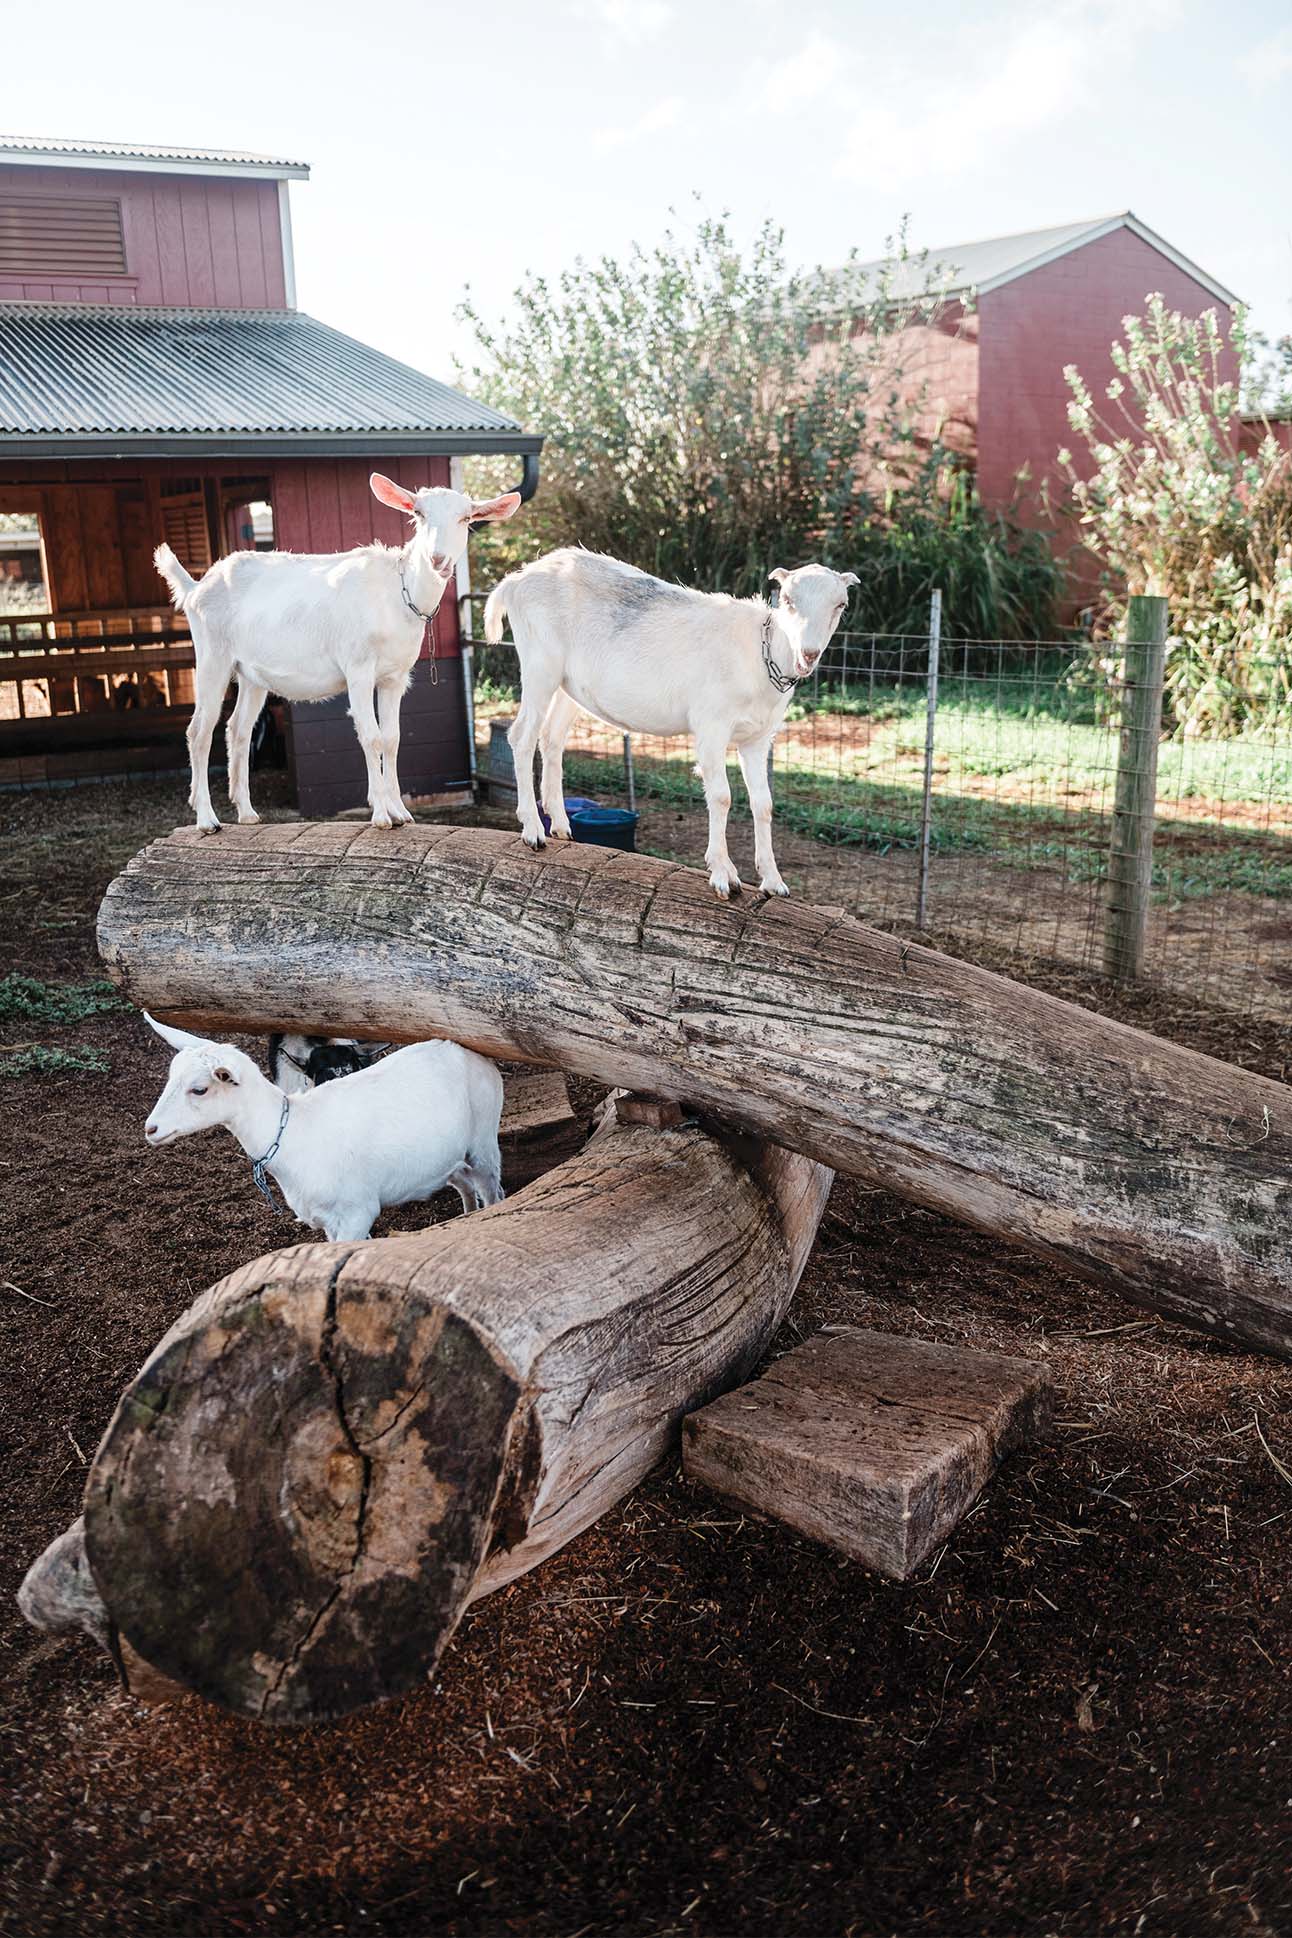 Three white goats on a farm, two standing on a wooden structure and one underneath it, with a red barn in the background.